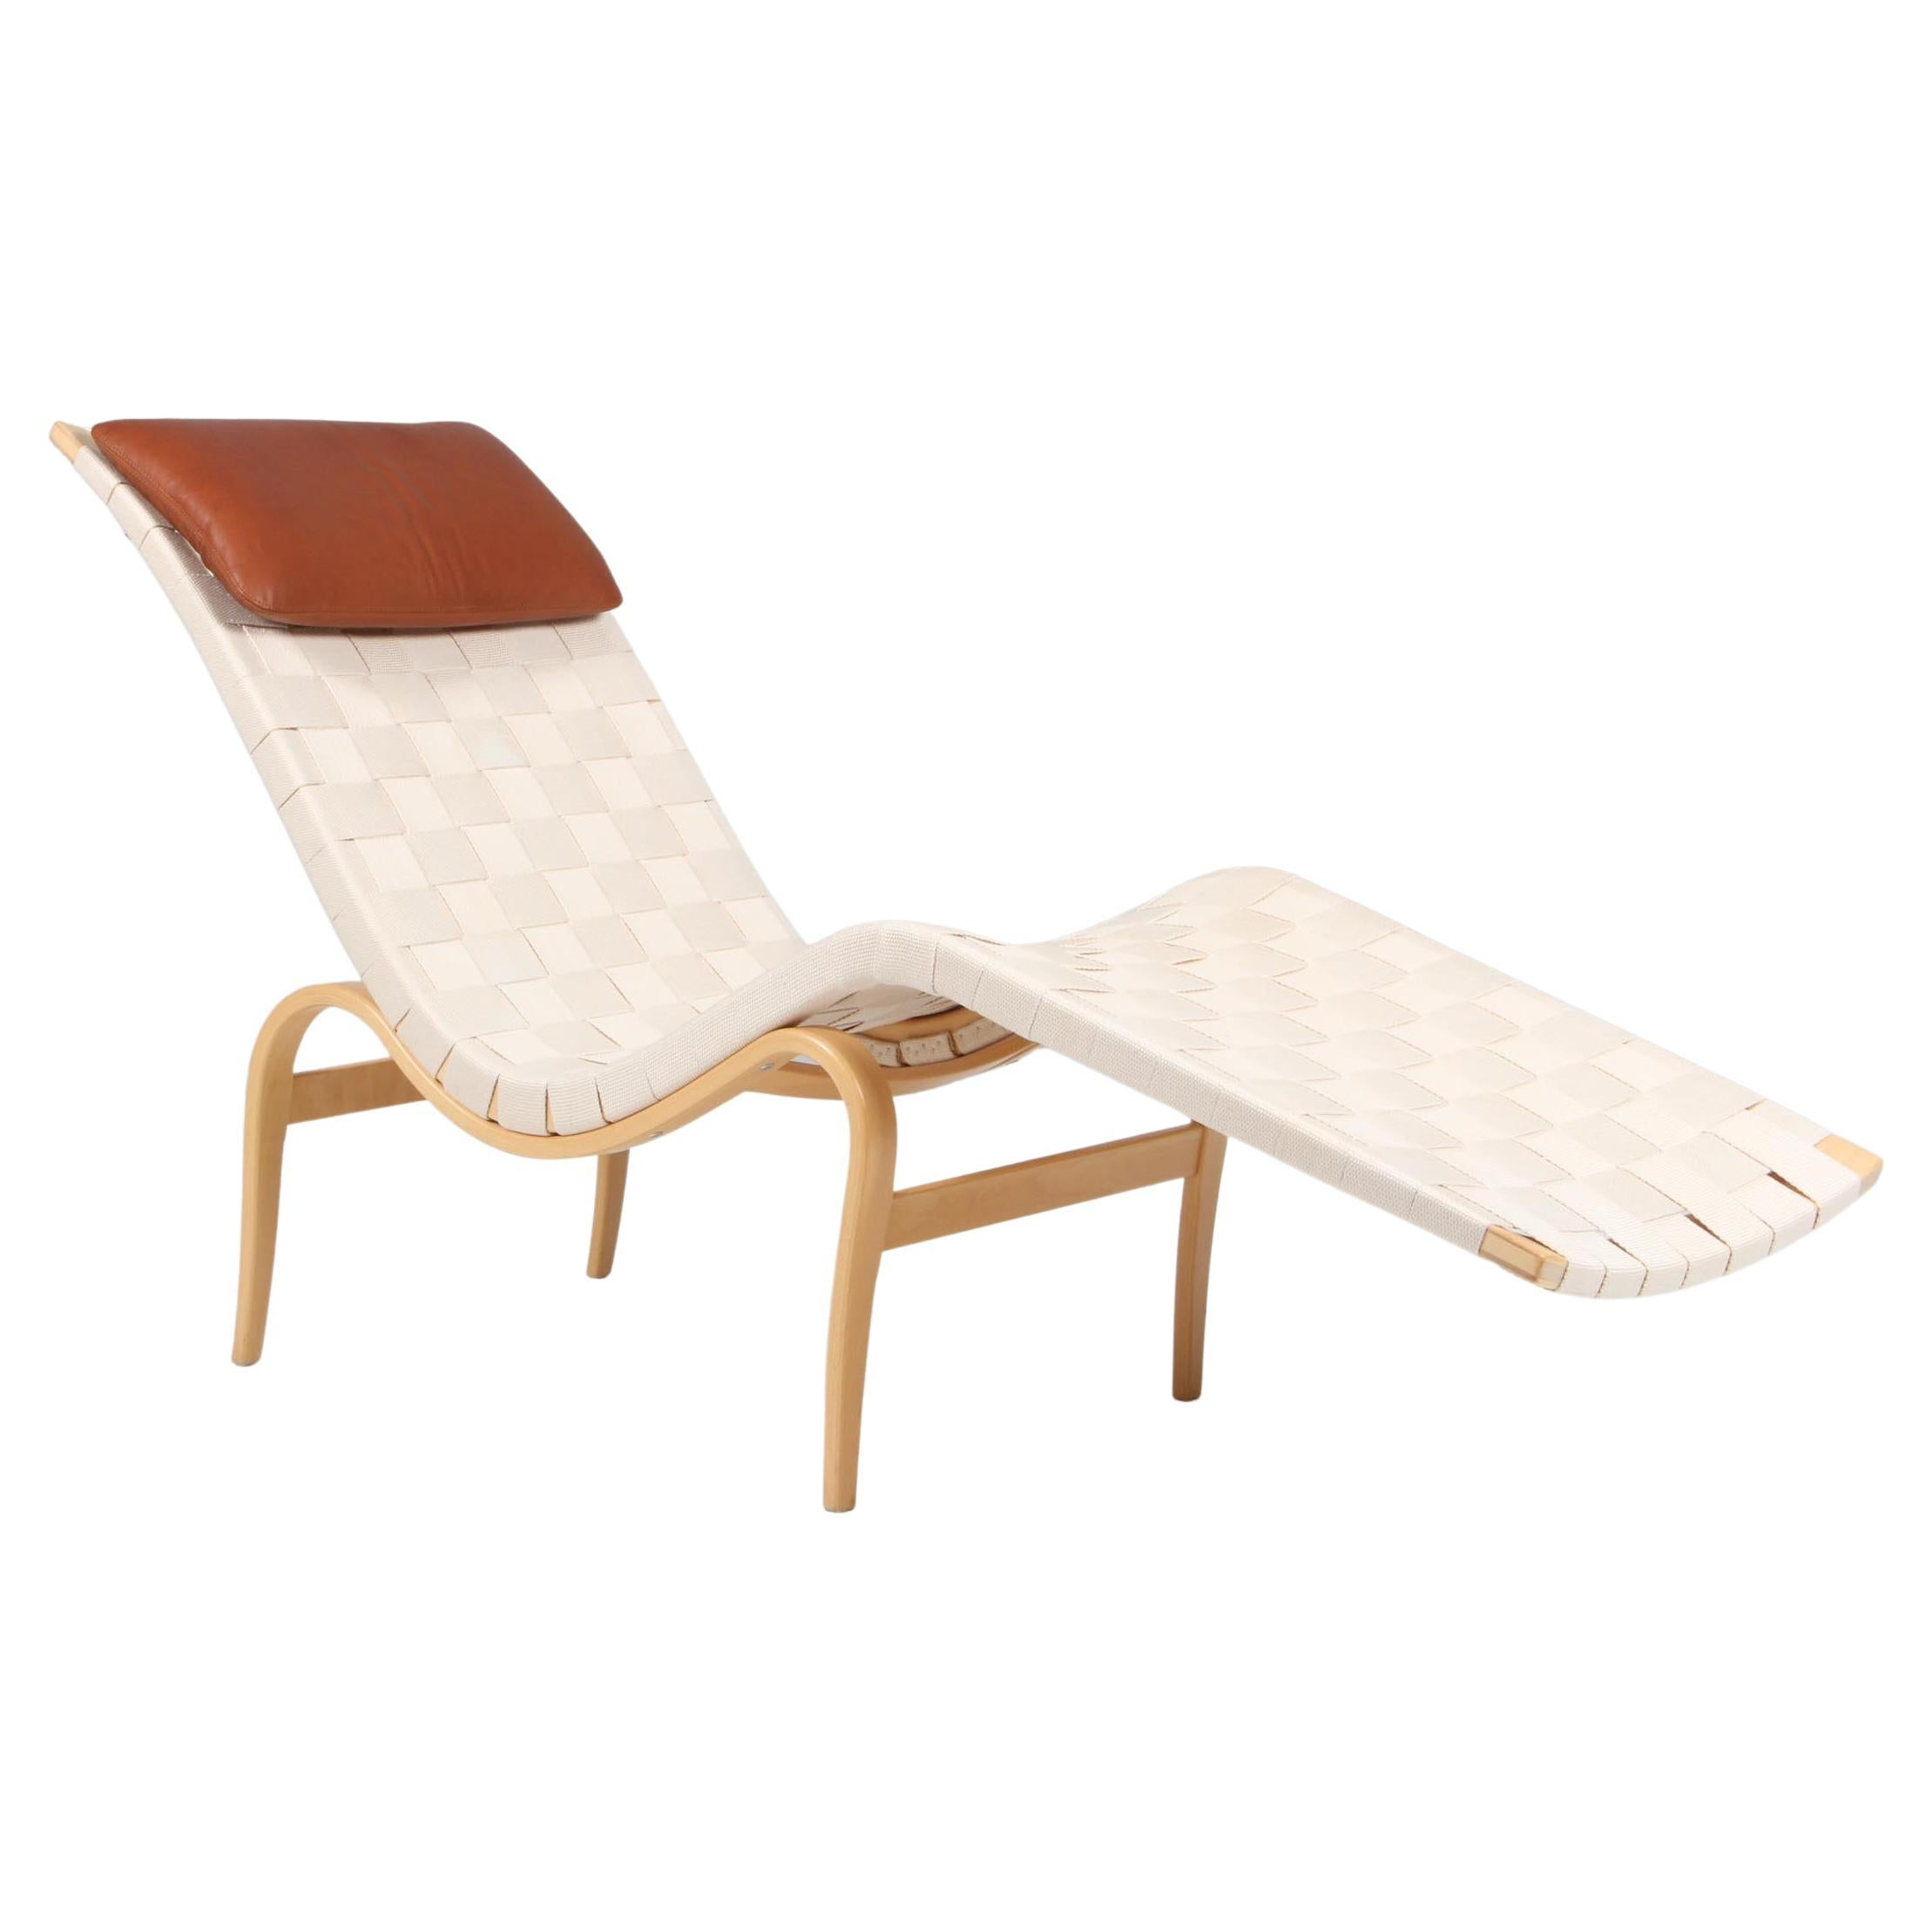 Bruno Mathsson "Pernilla 3" Lounge Chair in Leather and webbing Swedish